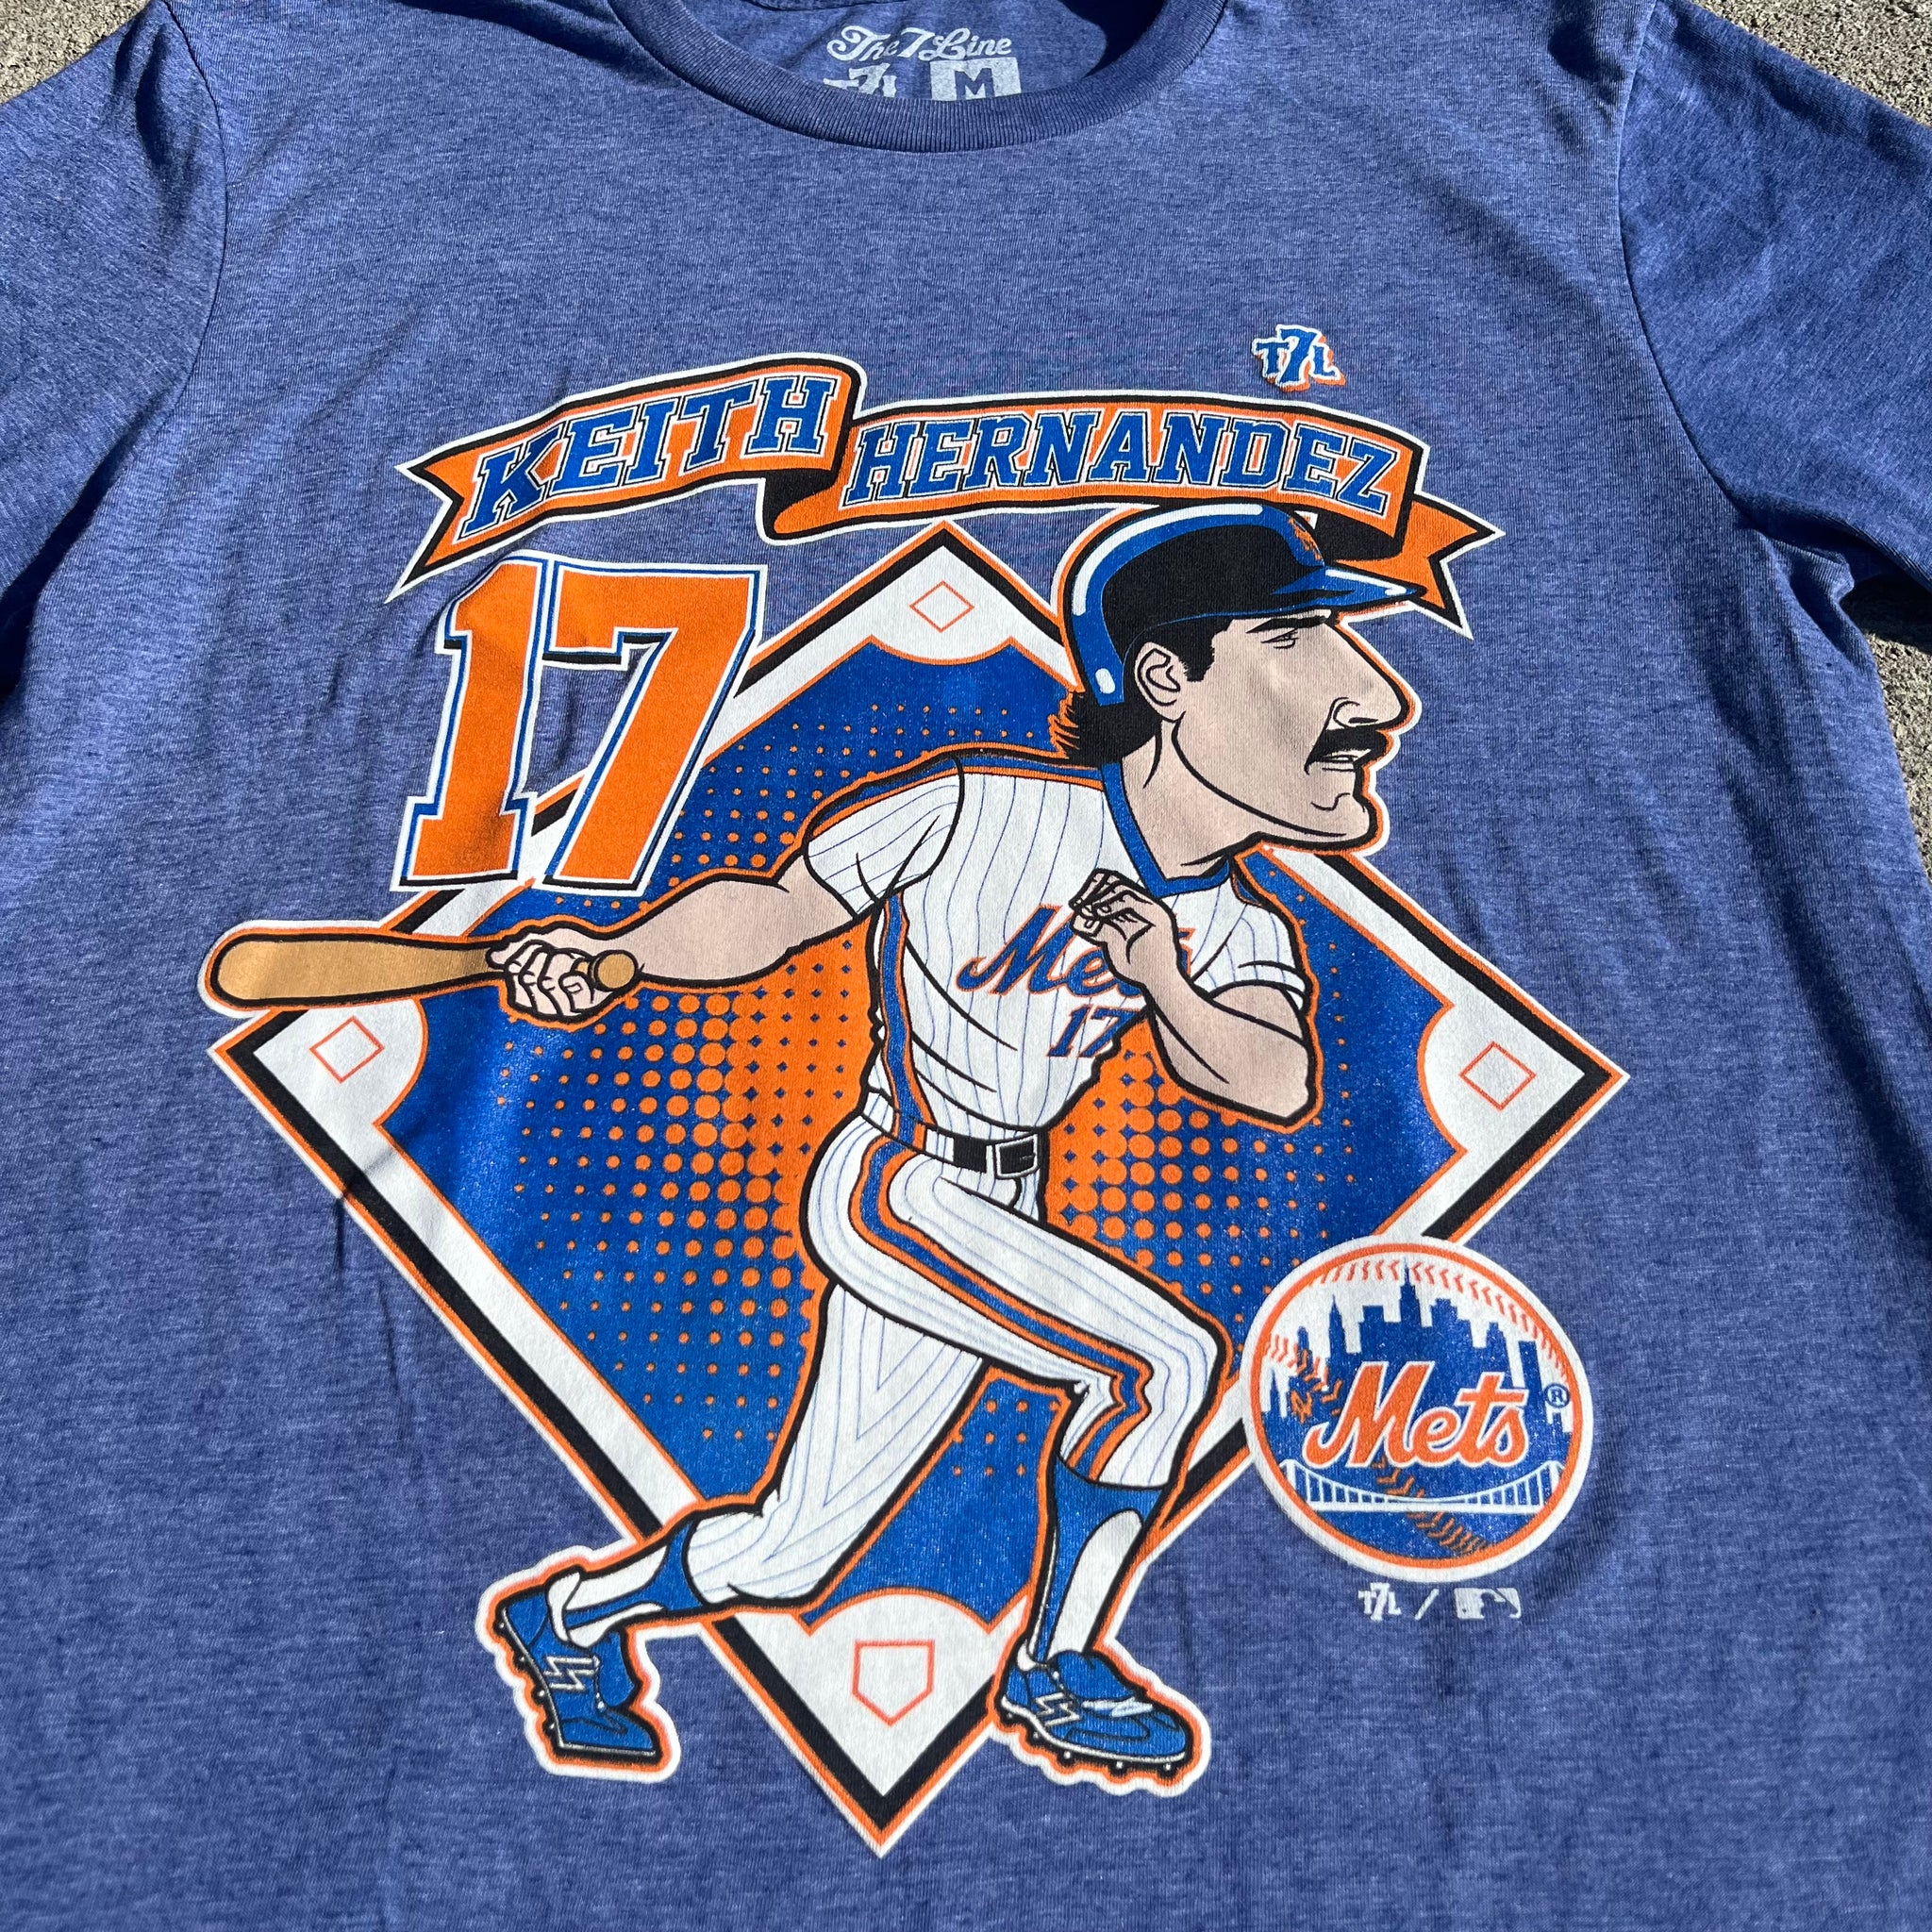 Keith Hernandez: Forgot shirt for Mets game, savagely roasted himself